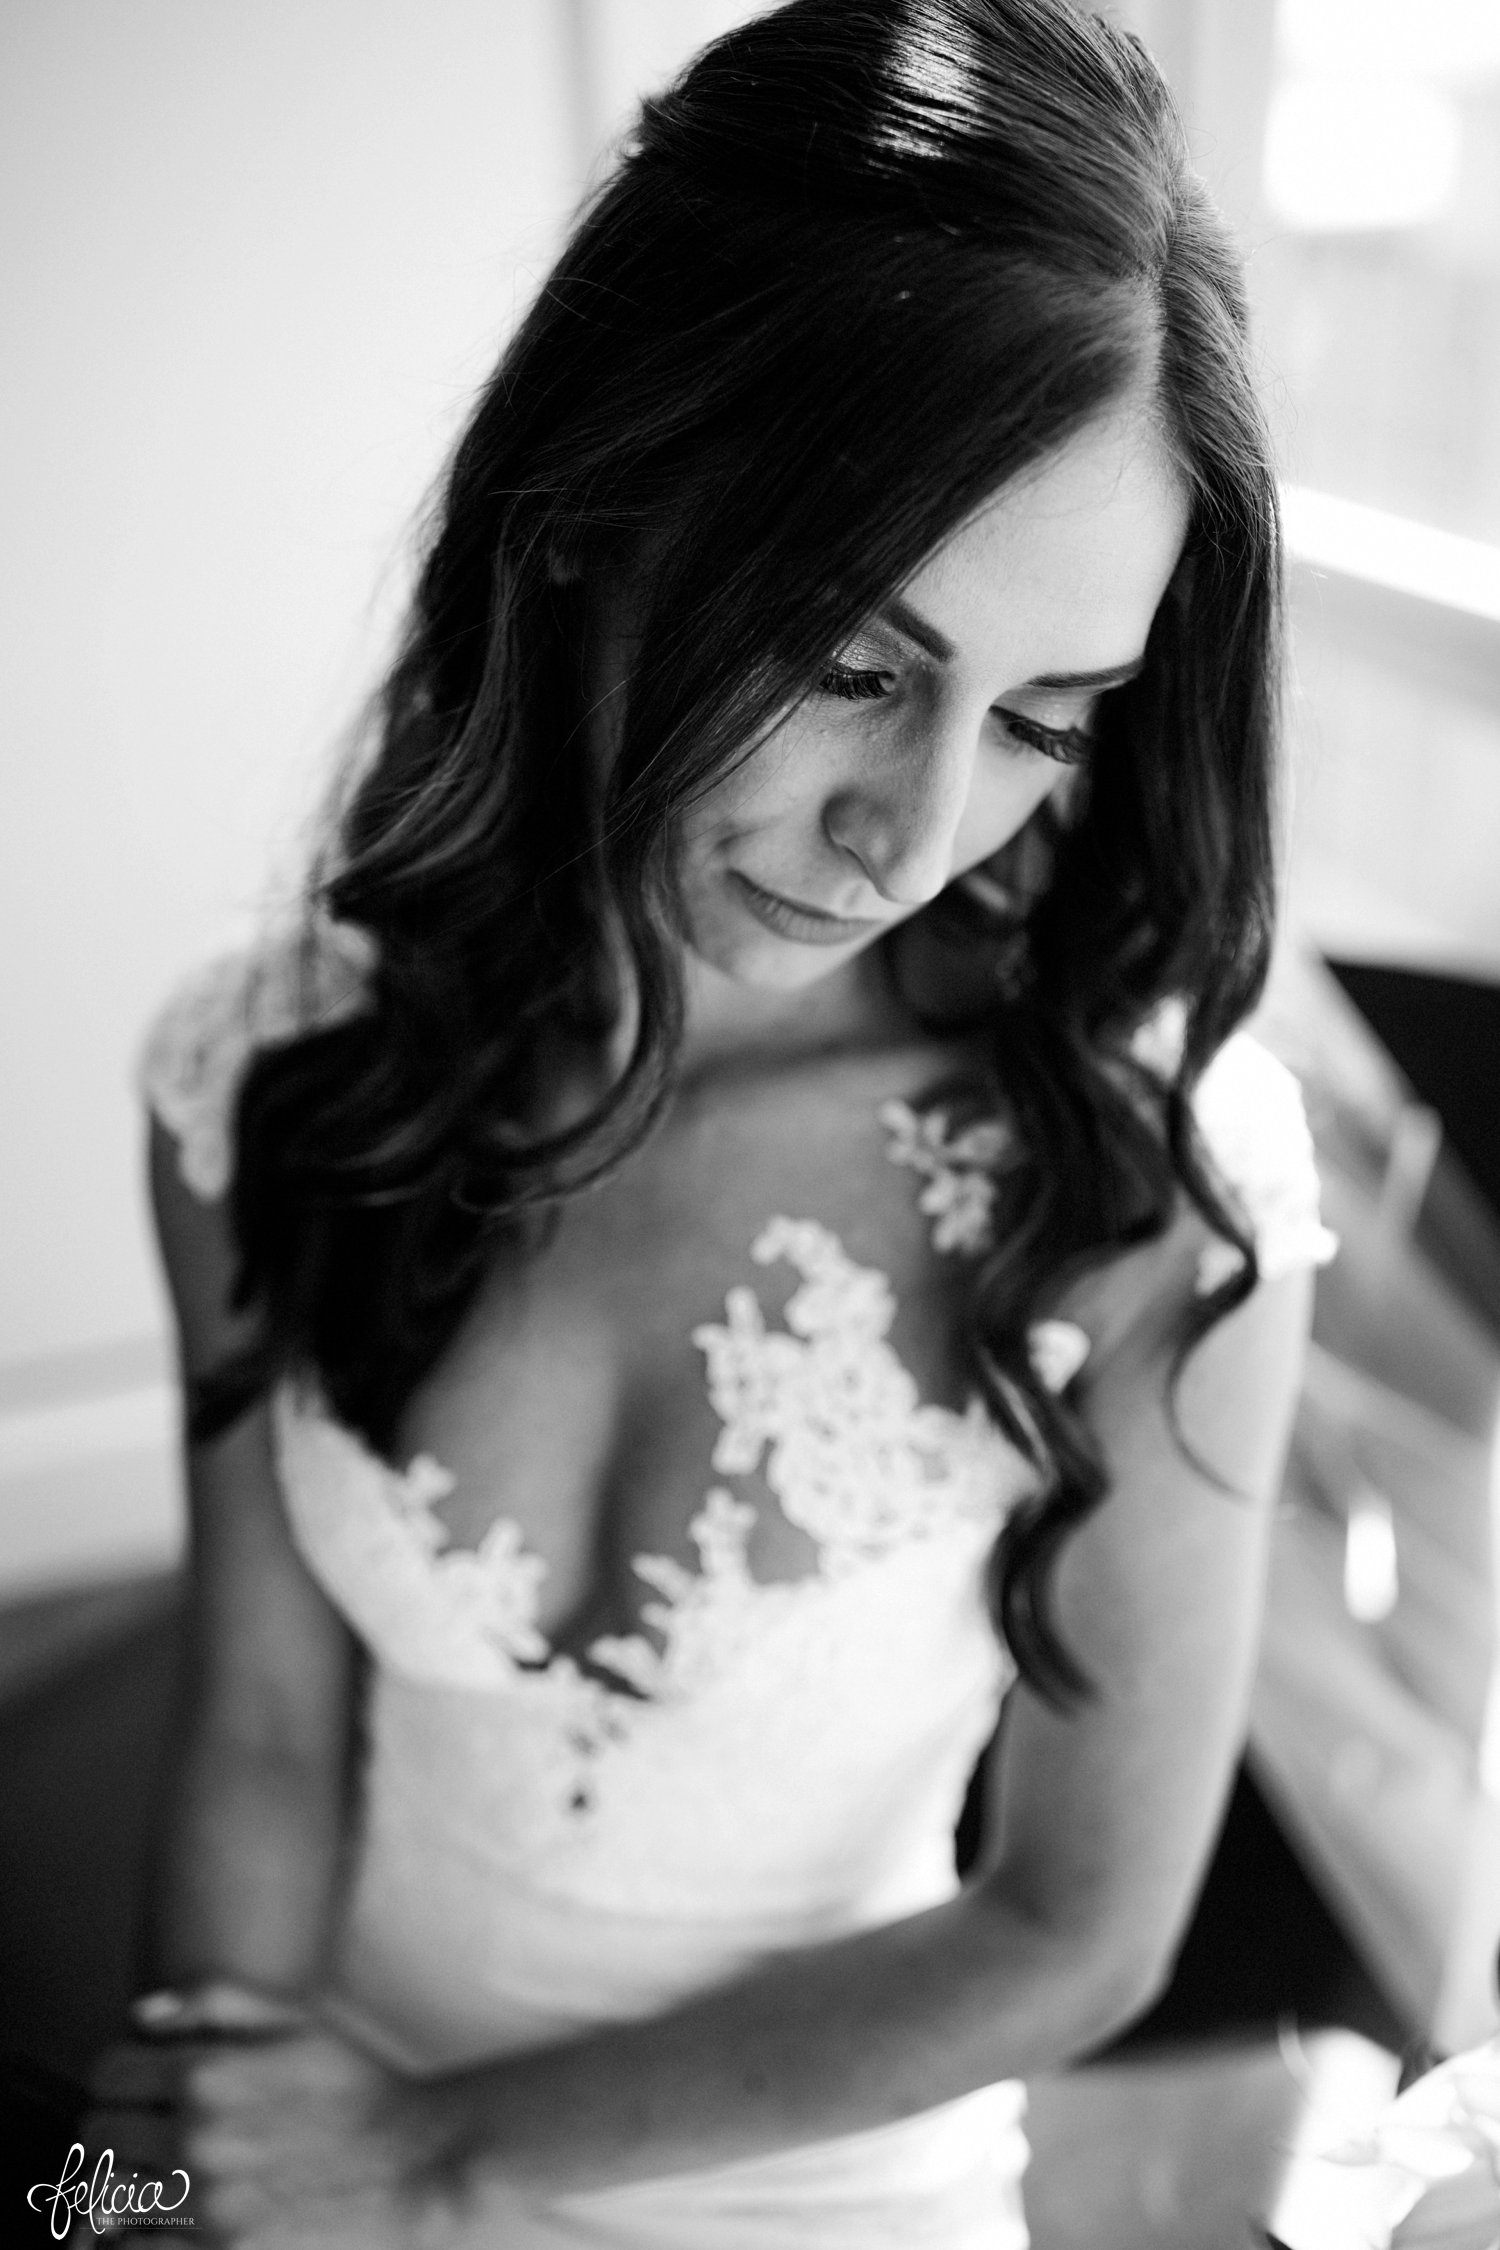 images by feliciathephotographer.com | destination wedding photographer | new york city | details | classic | shoes | pre ceremony | getting ready | kimpton ink48 hotel | putting on the dress | lace detail | open back | nordstrom | pronovias | black and white |